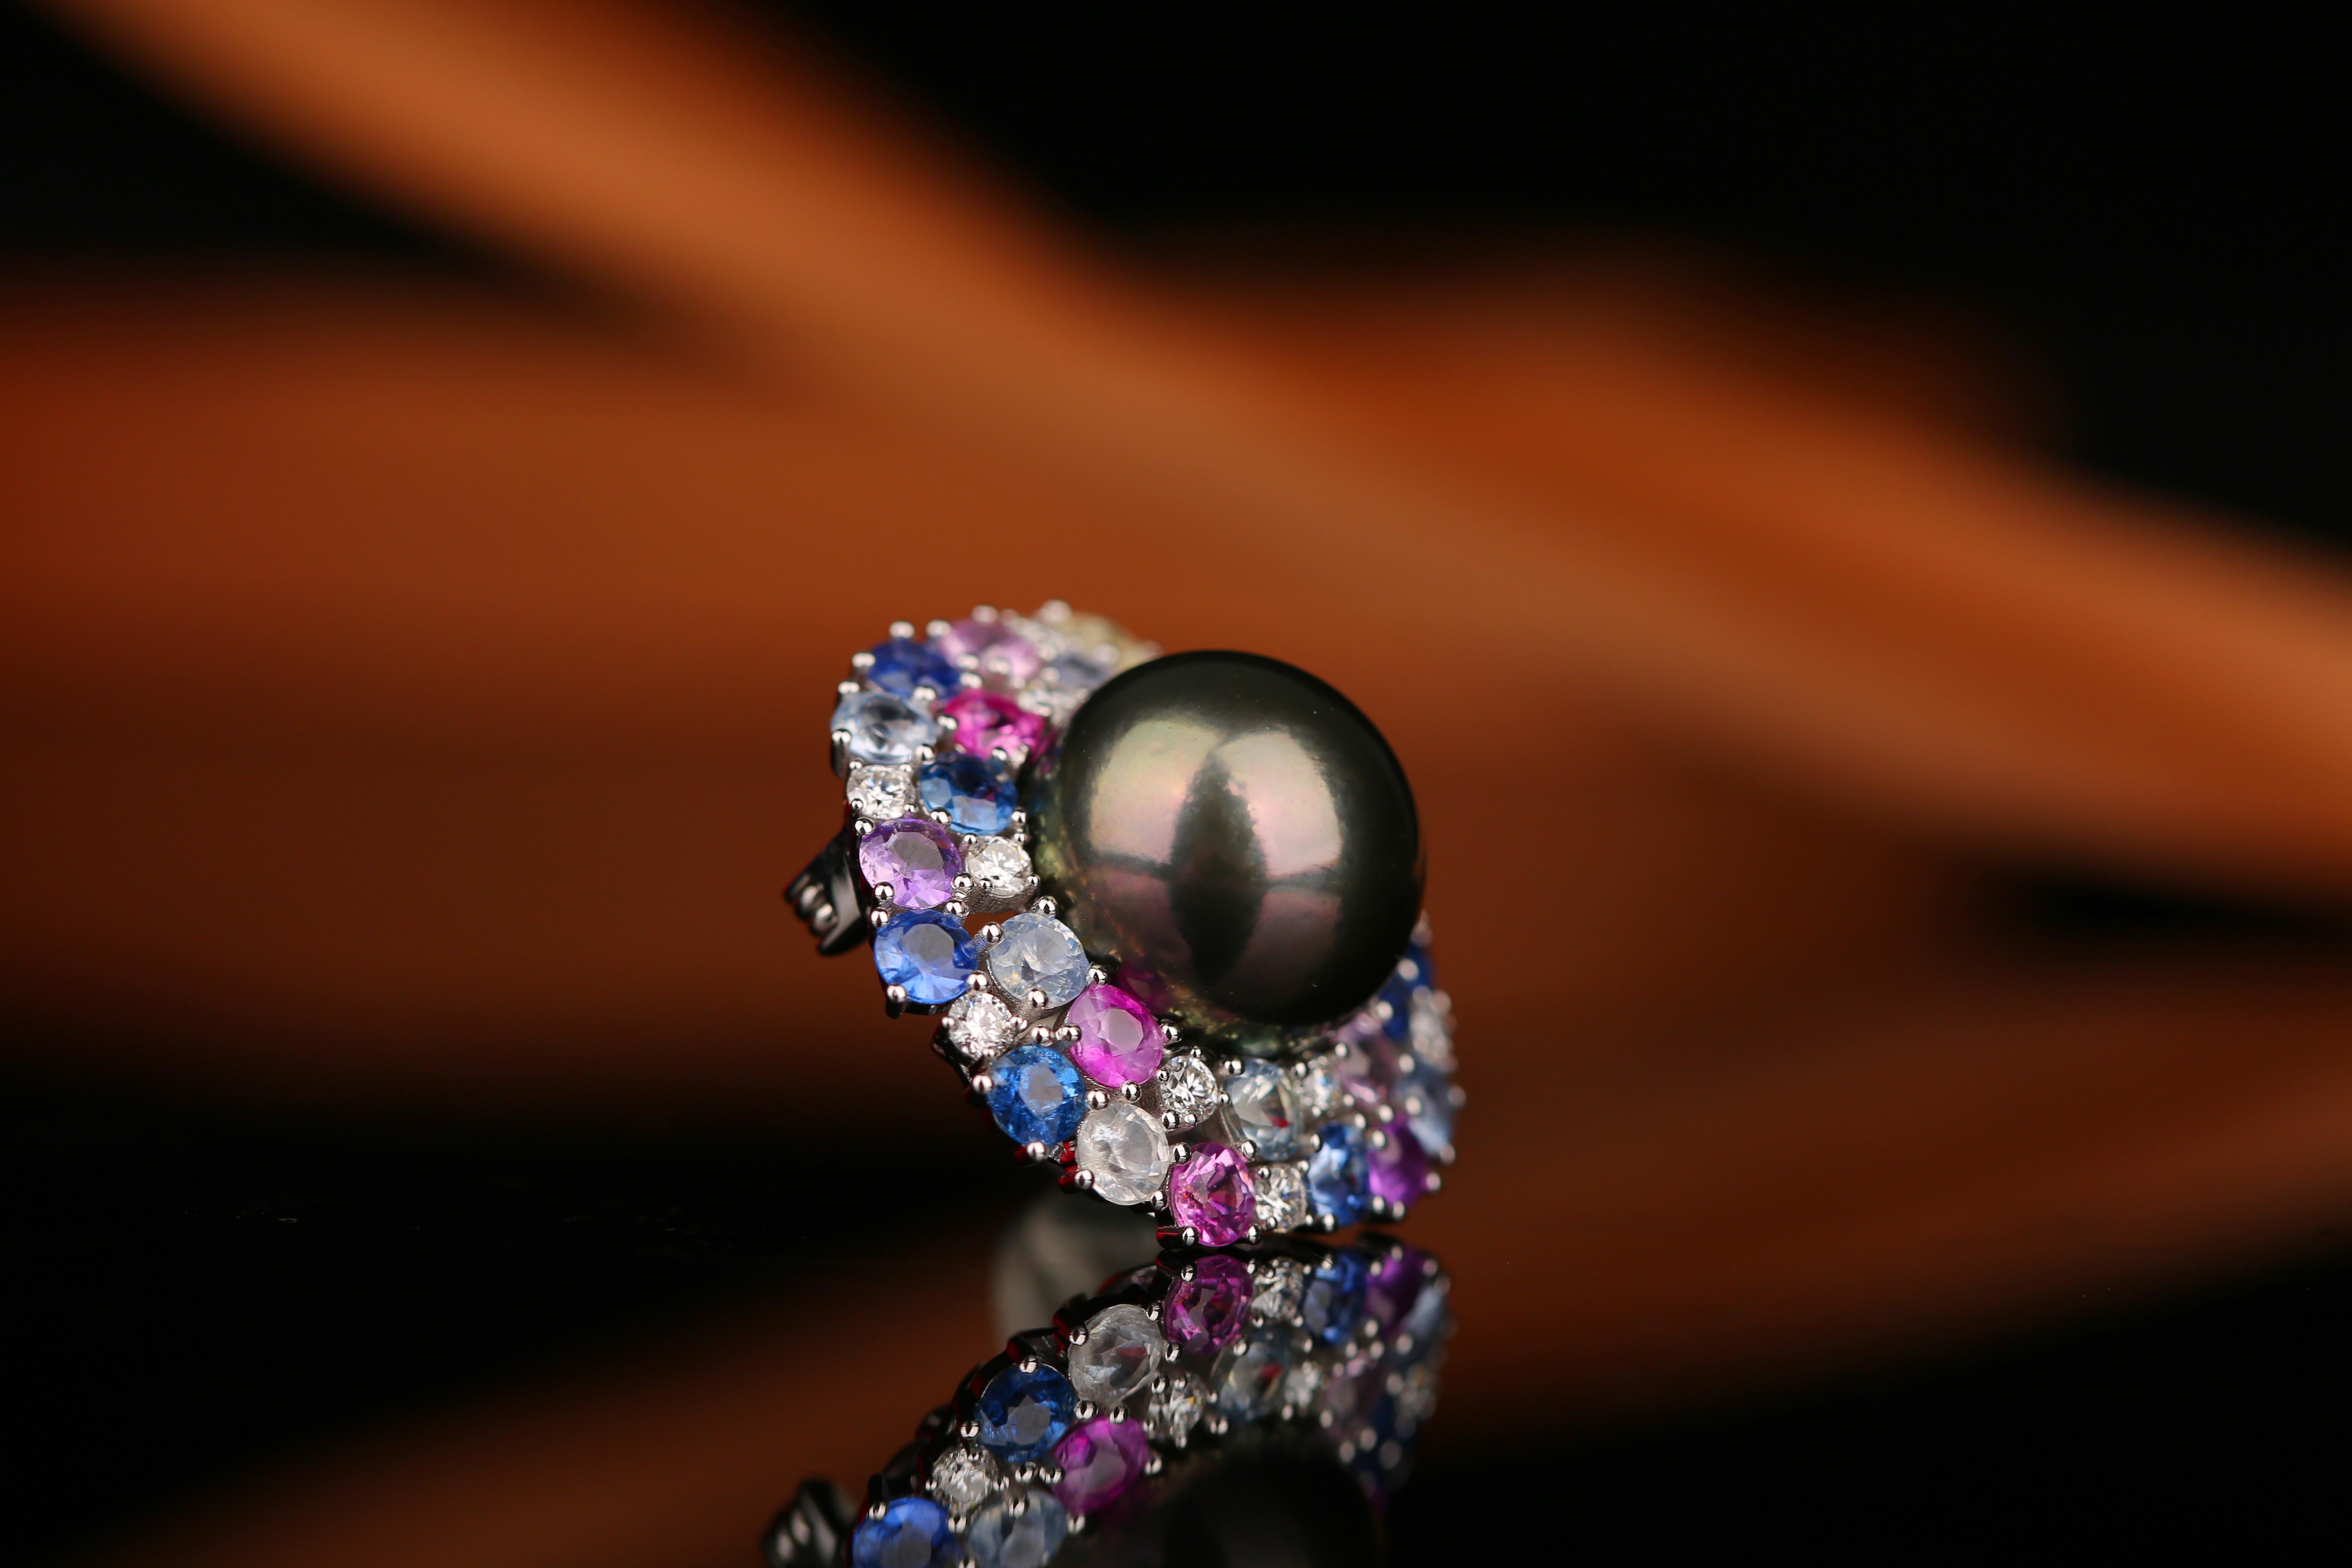 
A 14.5 mm black tahitian Pearl and Yellow Diamond Brooch and Pendant  in 18k white Gold
It consists of a ROUND Shape South Sea Pearl with Very Good Lustre and Very Minor Surface Blemish

Total Natural Diamond weight is 0.636ct , The Colour of the